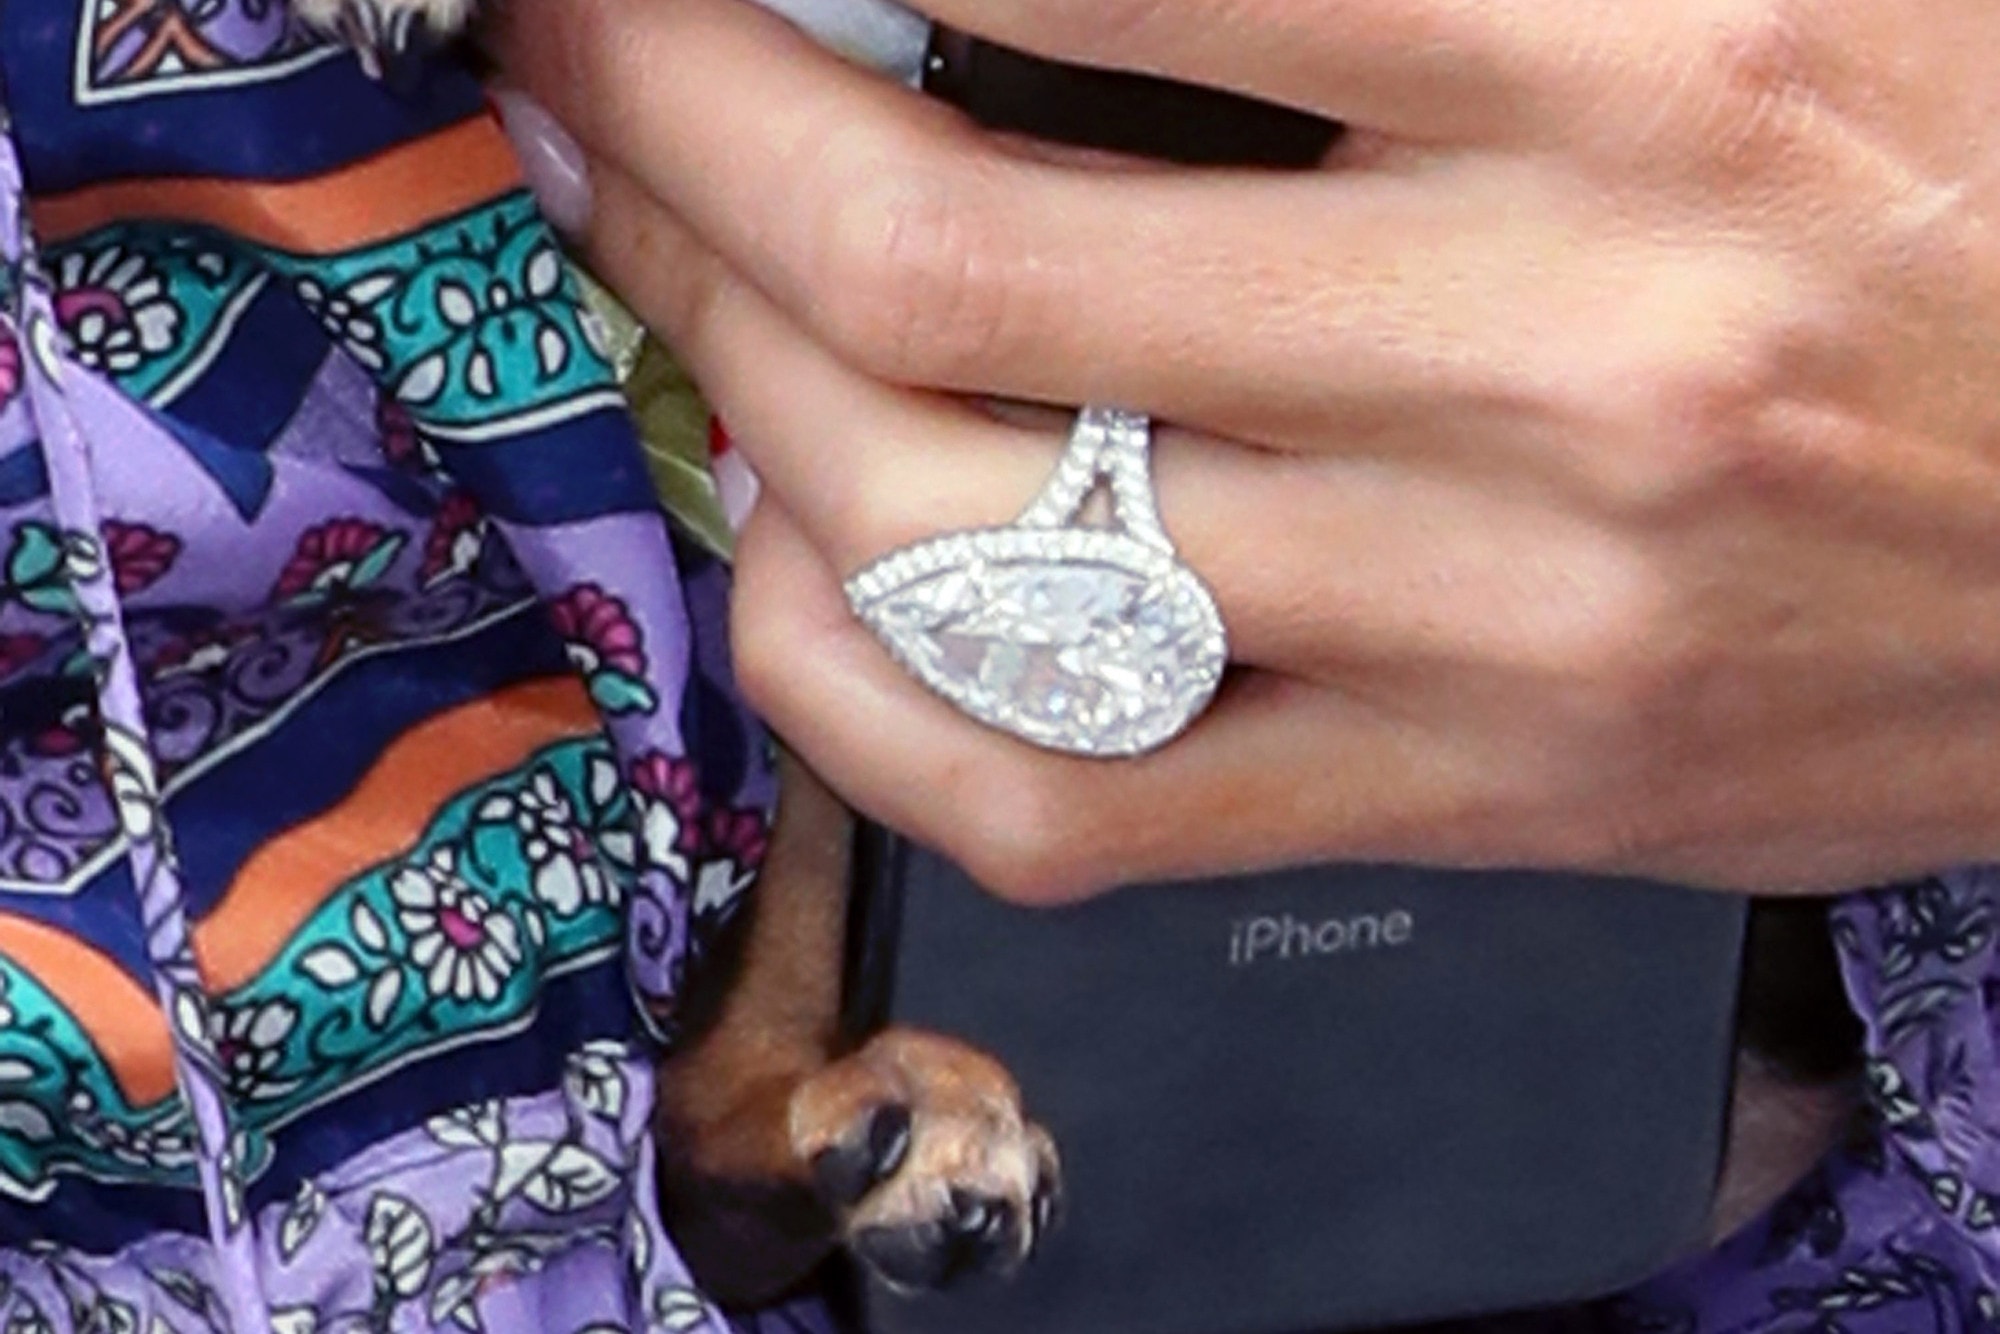 Celebrity Engagement Ring Photos: Details on Stars' Diamonds | Closer Weekly